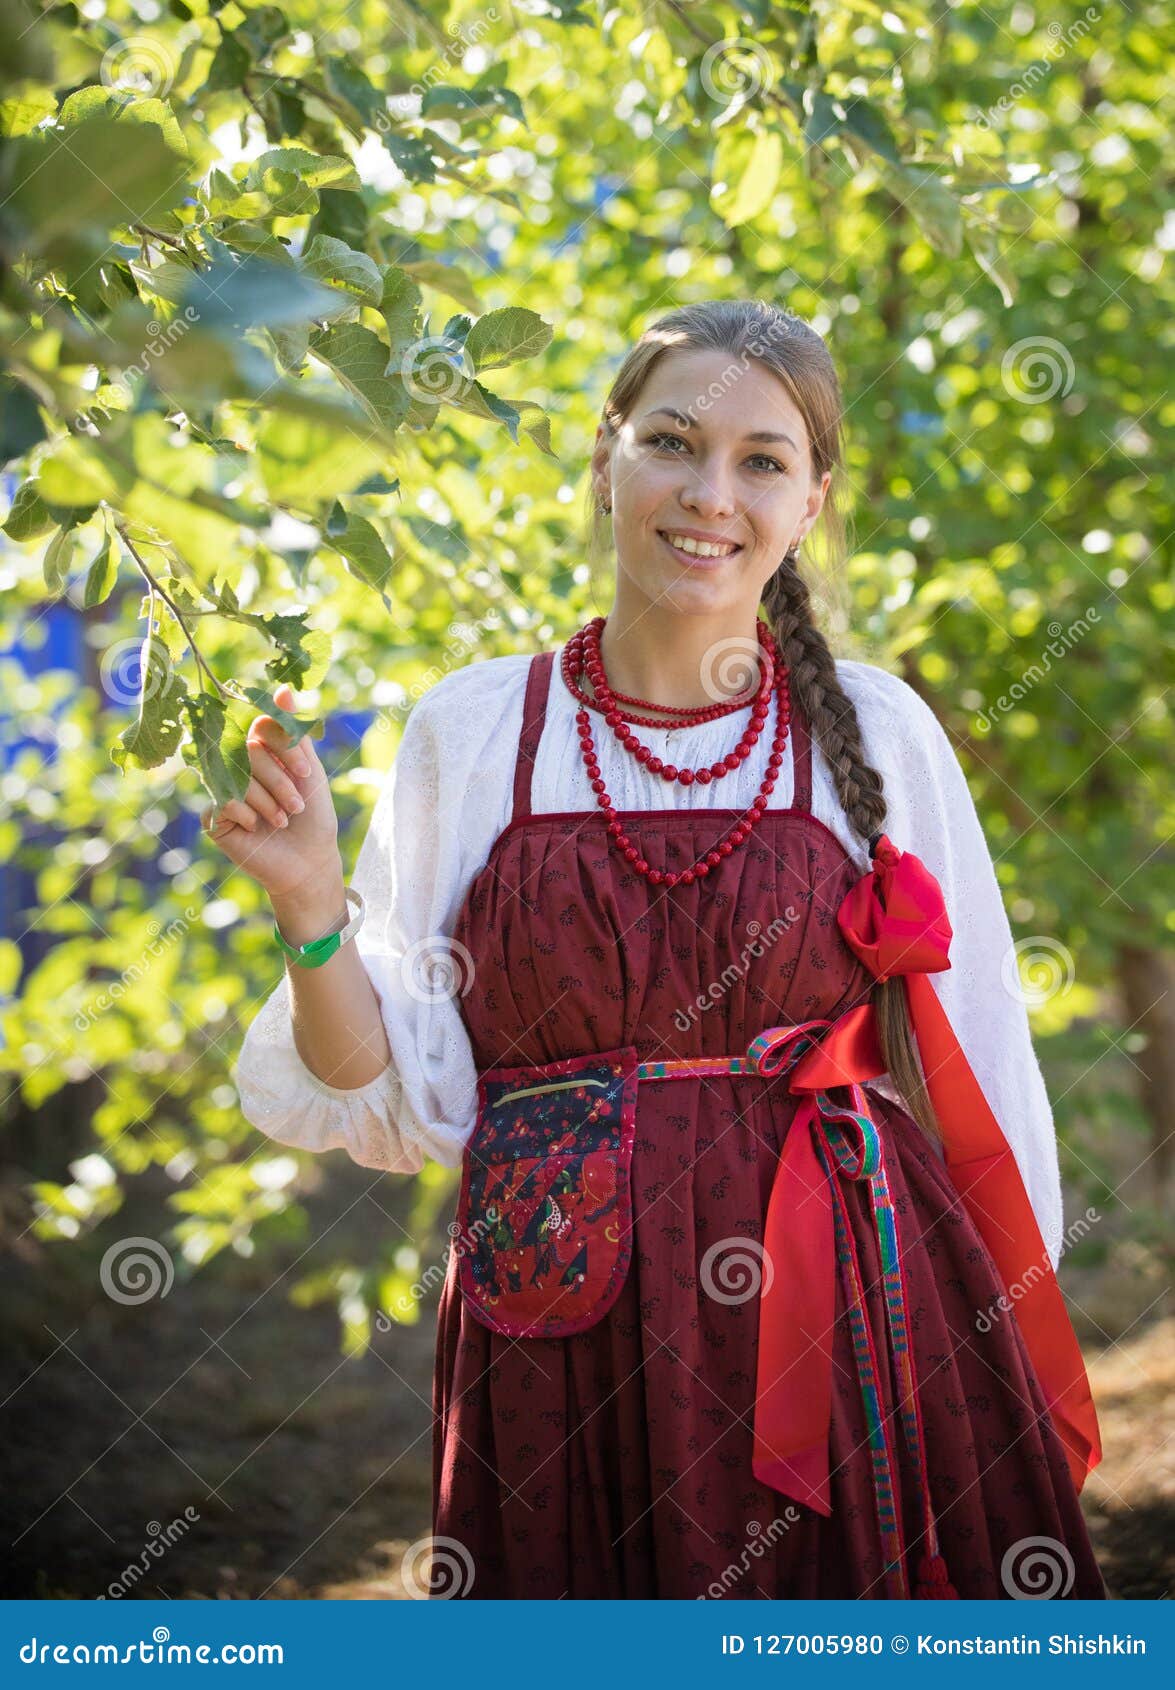 Smiling Young Woman in Russian Folk Costume on the Foliage Background ...